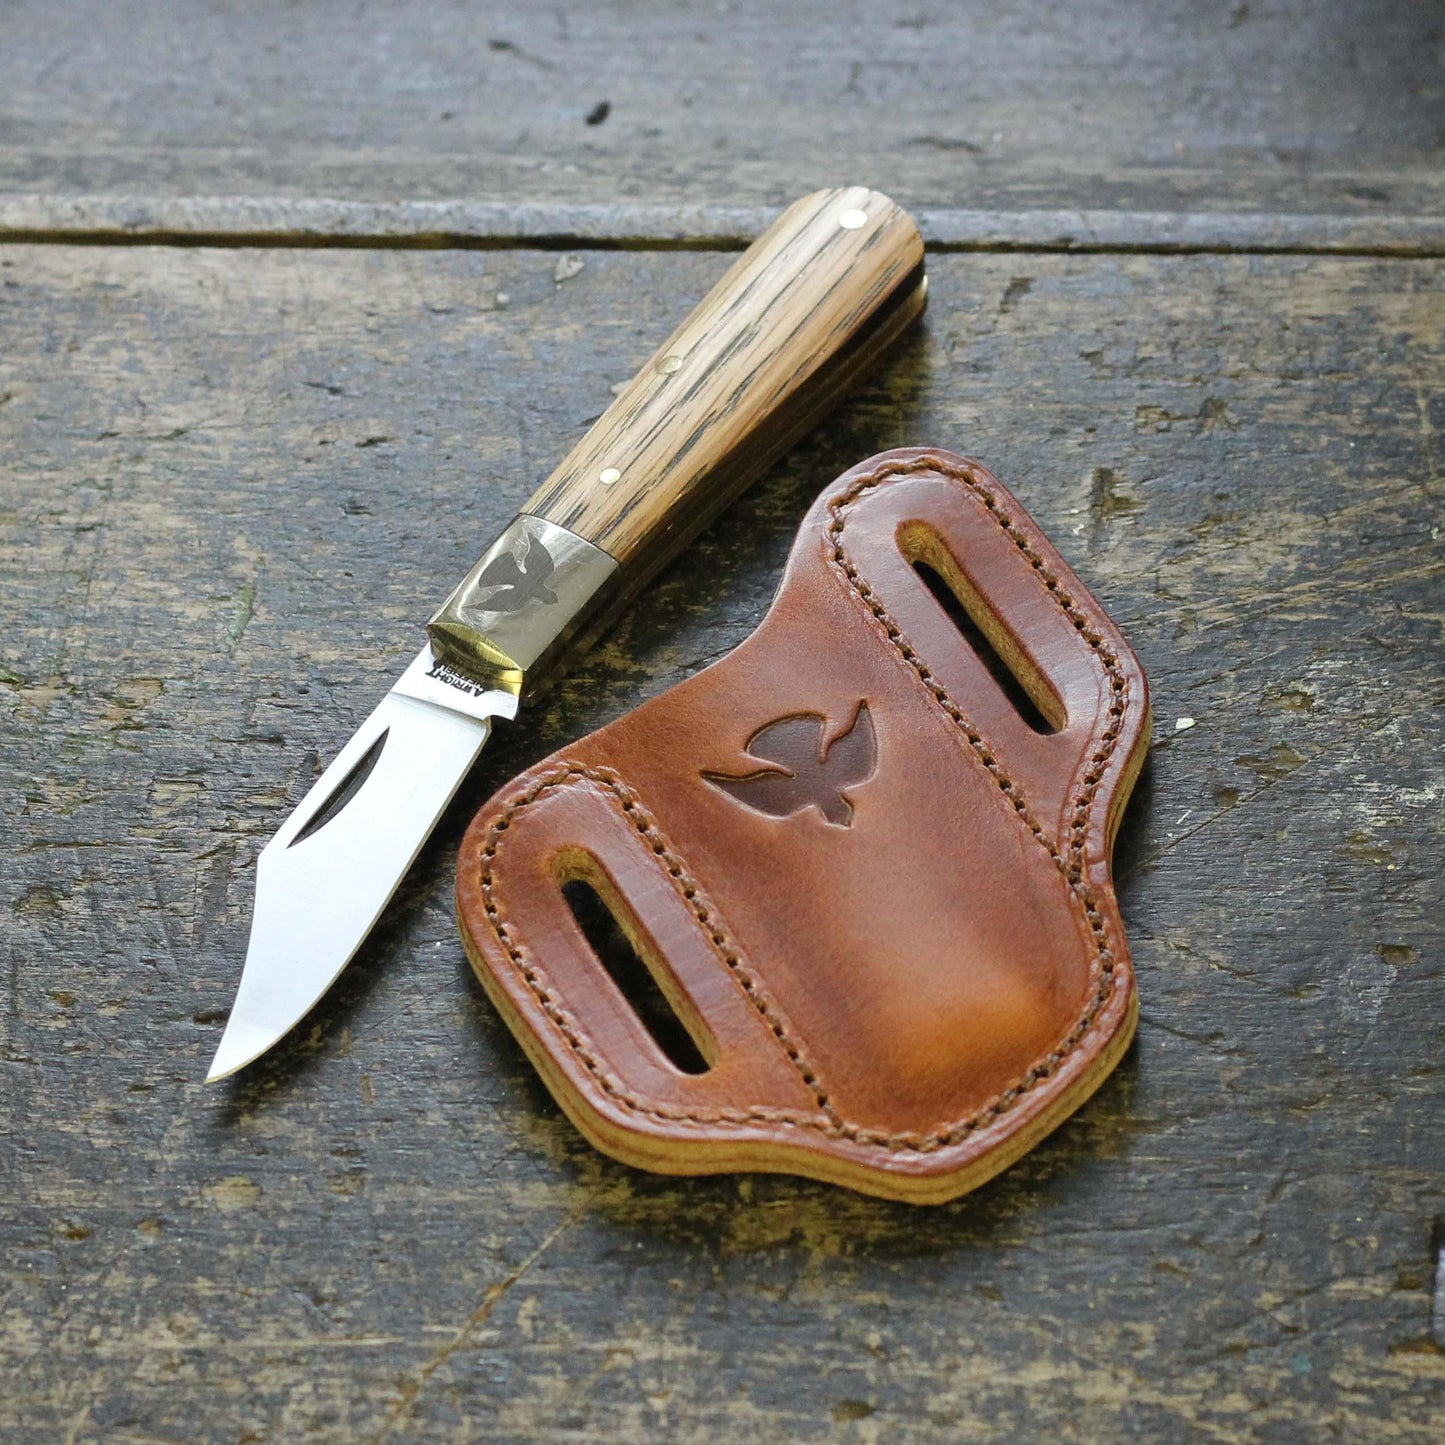 a pocket knife beside a leather holster with the ashley clarke logo stamp